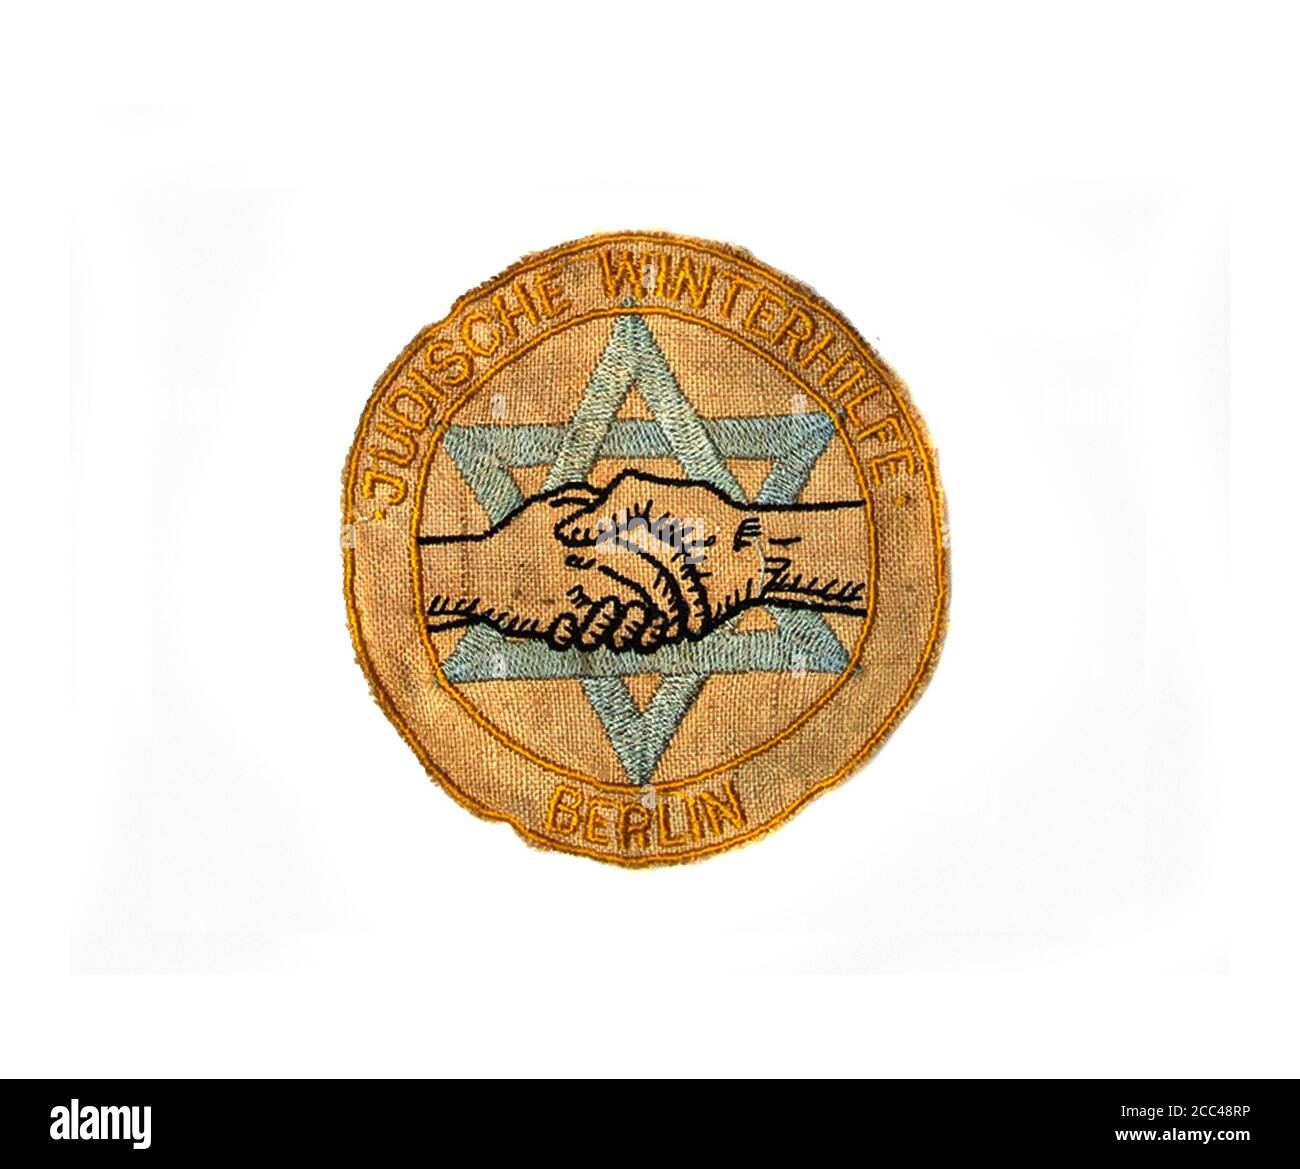 A German Jewish WWII winter aid patch. 'Judische Winterhilfe Berlin' cloth shoulder patch featuring two clasped hands before Star of David with the na Stock Photo